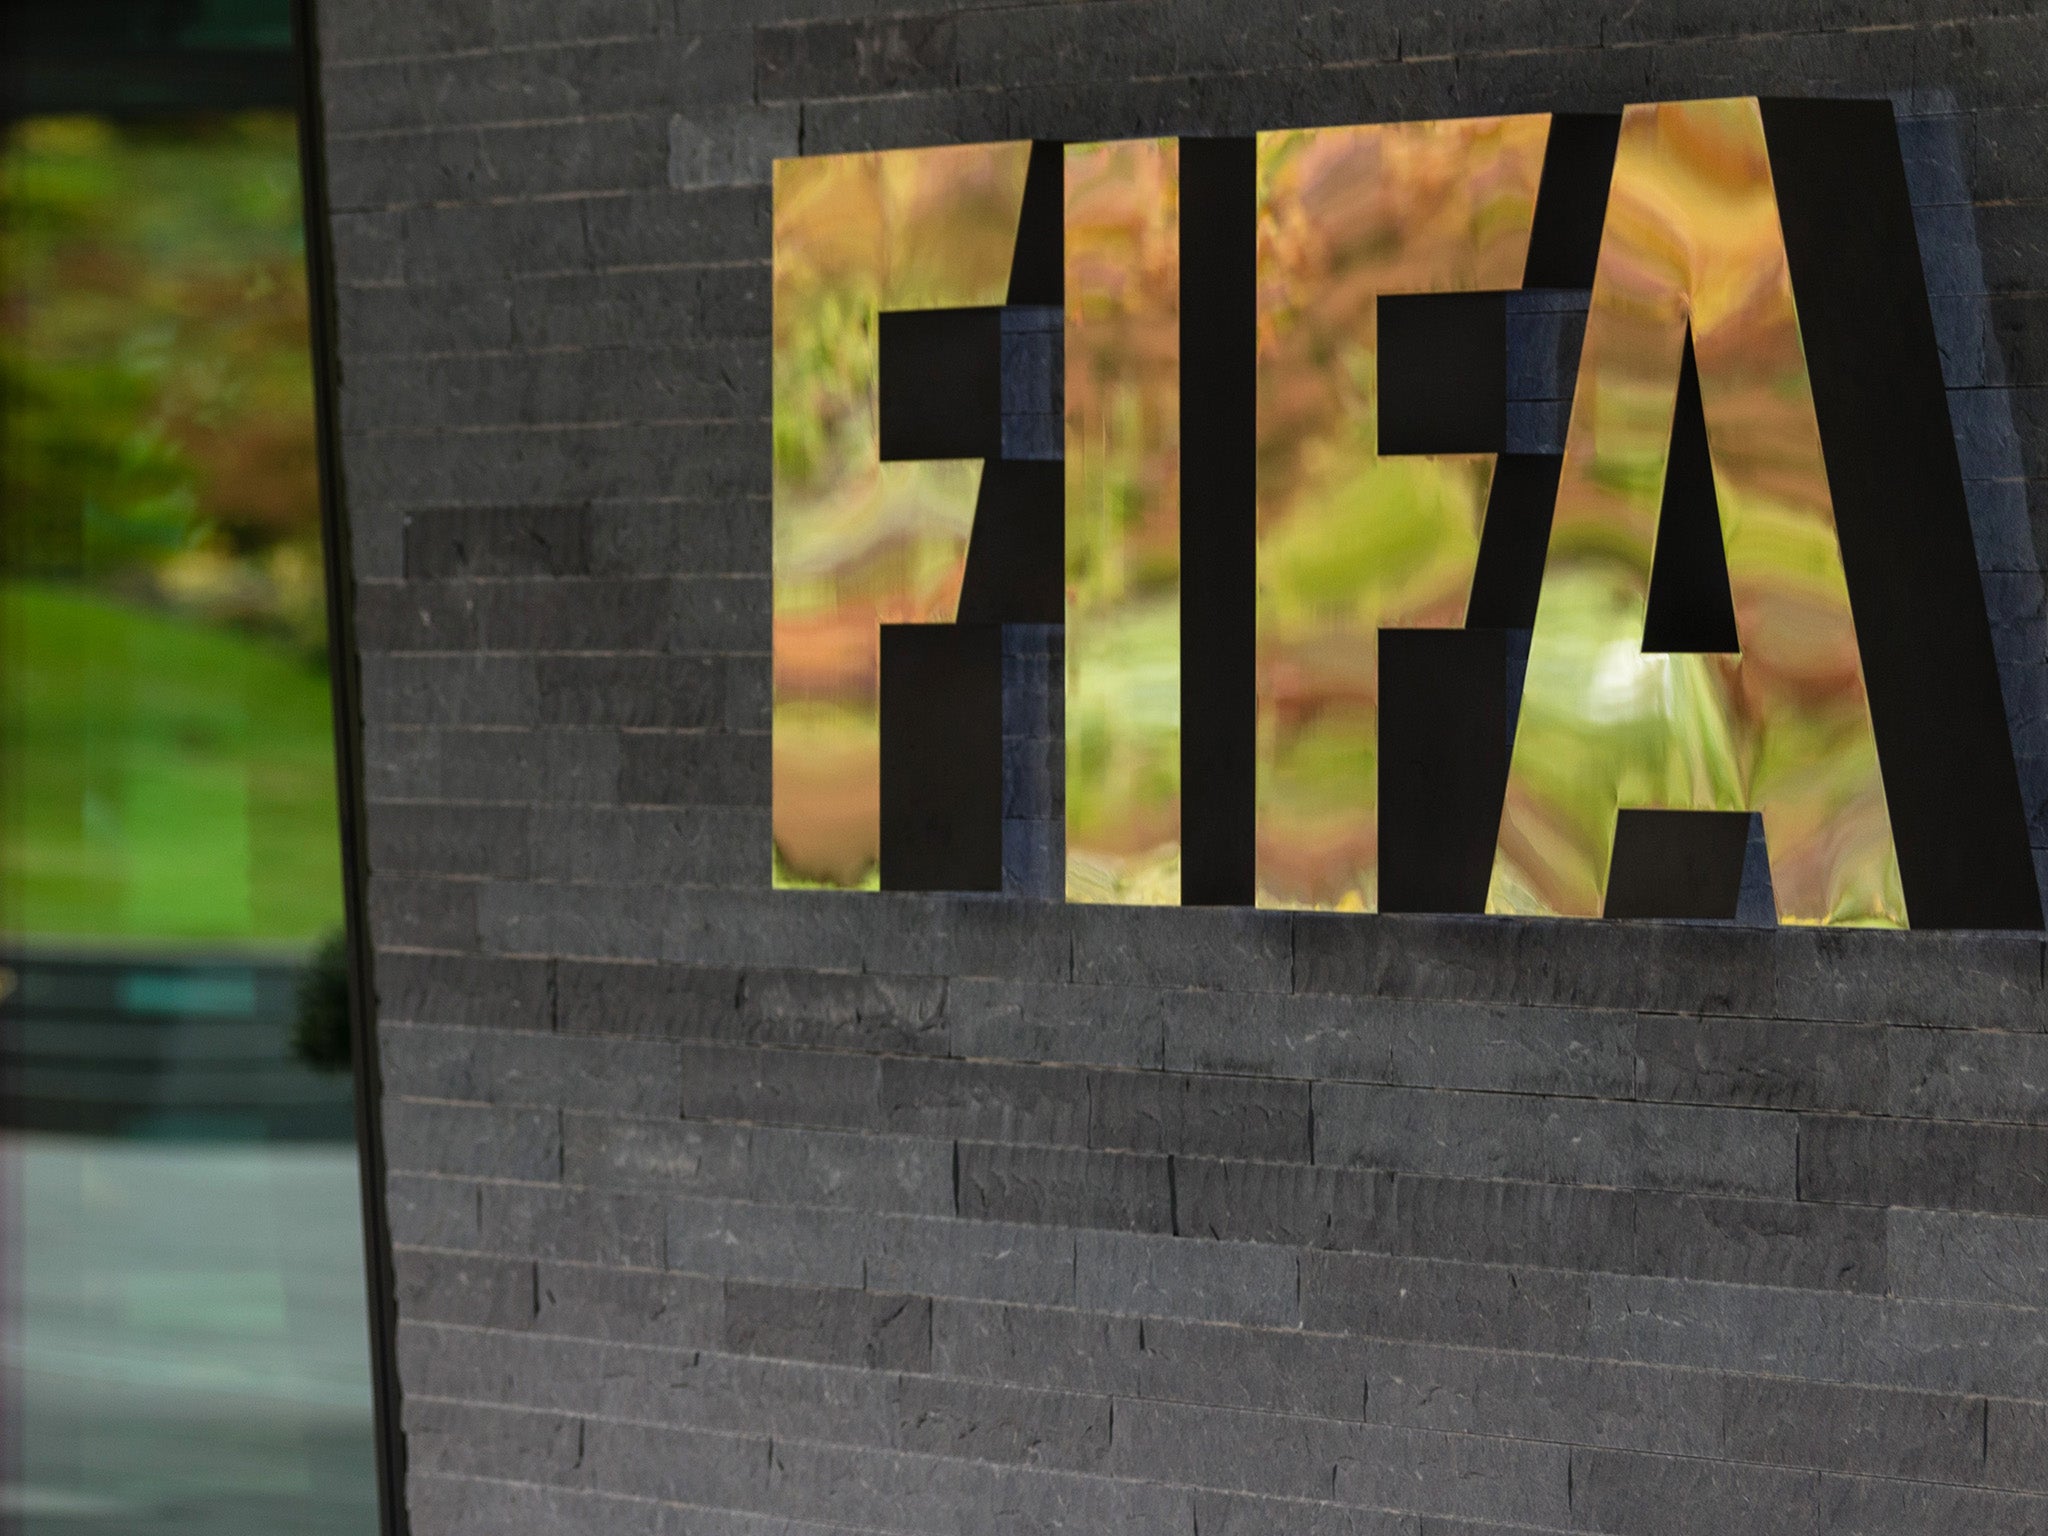 The Fifa council meeting begins on October 13